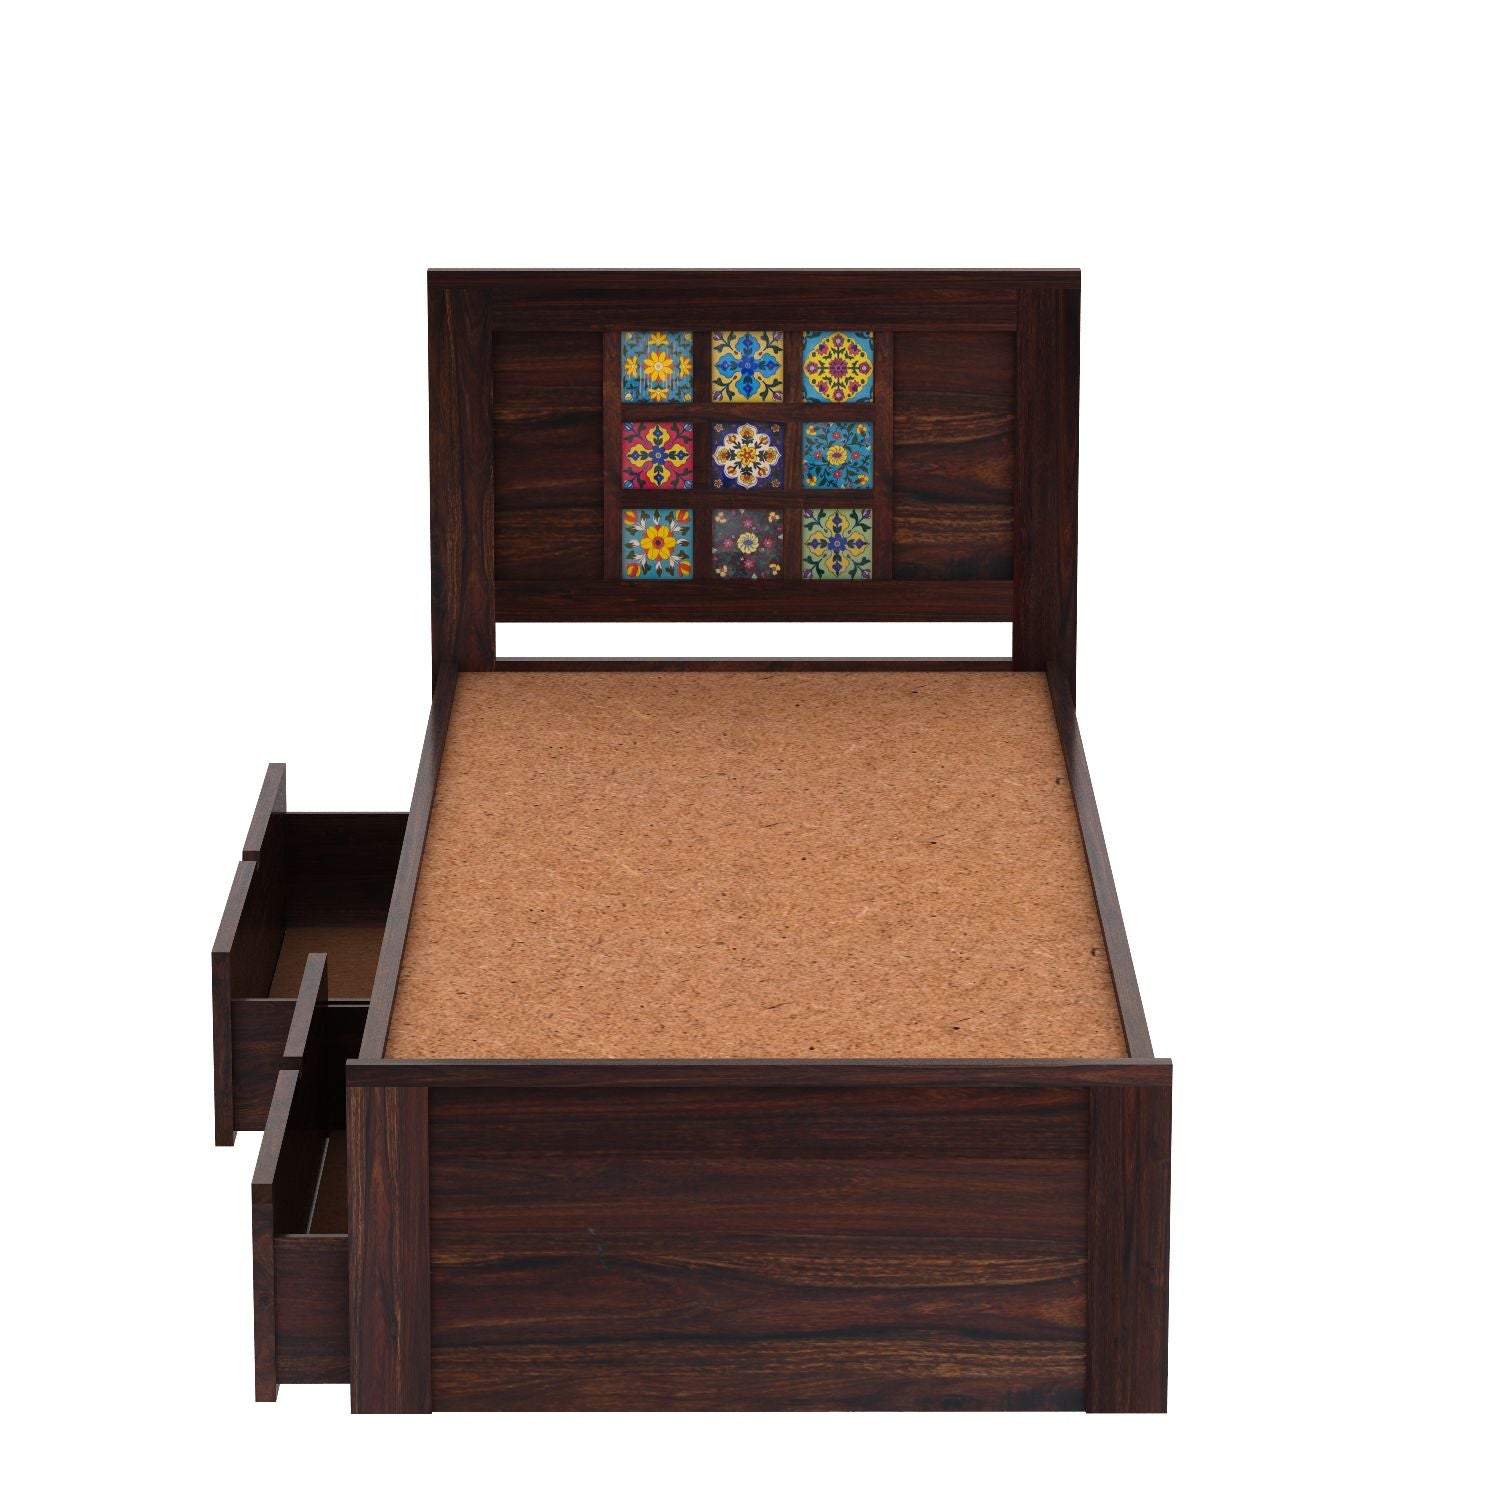 Dotwork Solid Sheesham Wood Single Bed With Two Drawers (Walnut Finish)